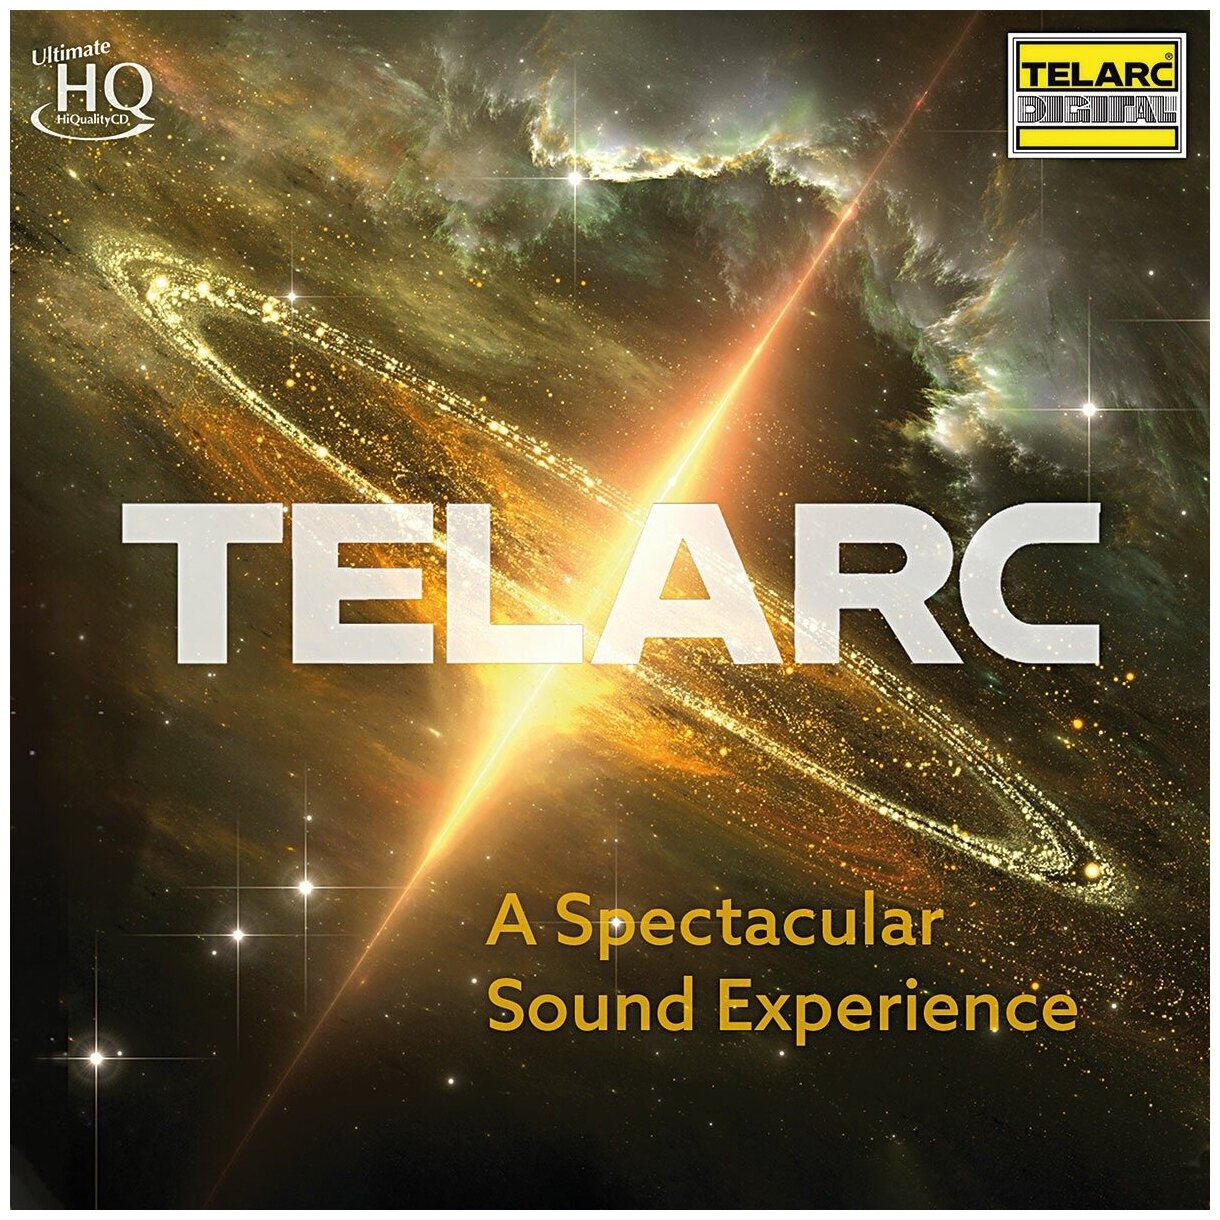 Inakustik CD Telarc - A Spectacular Sound Experience 01678085